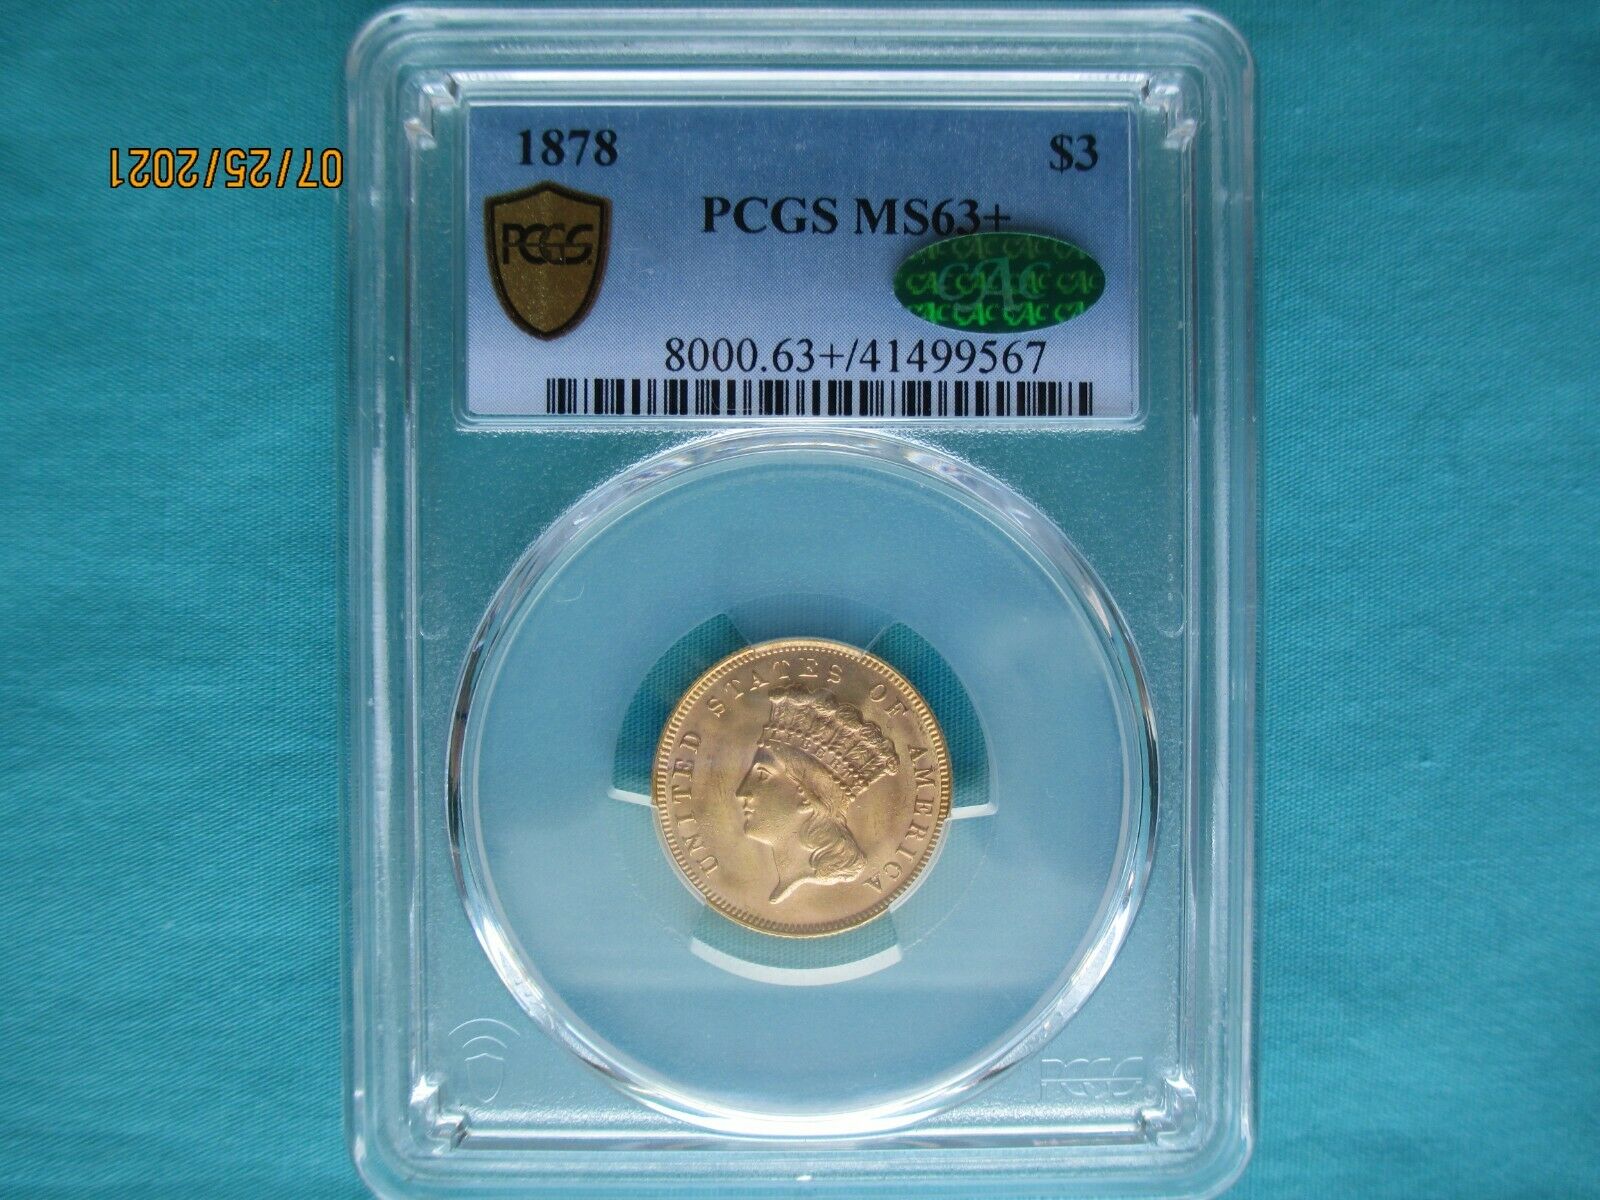 1878 $3 Dollar Gold Princess Cac - Pcgs Ms63+ Secure!! Really Nice!